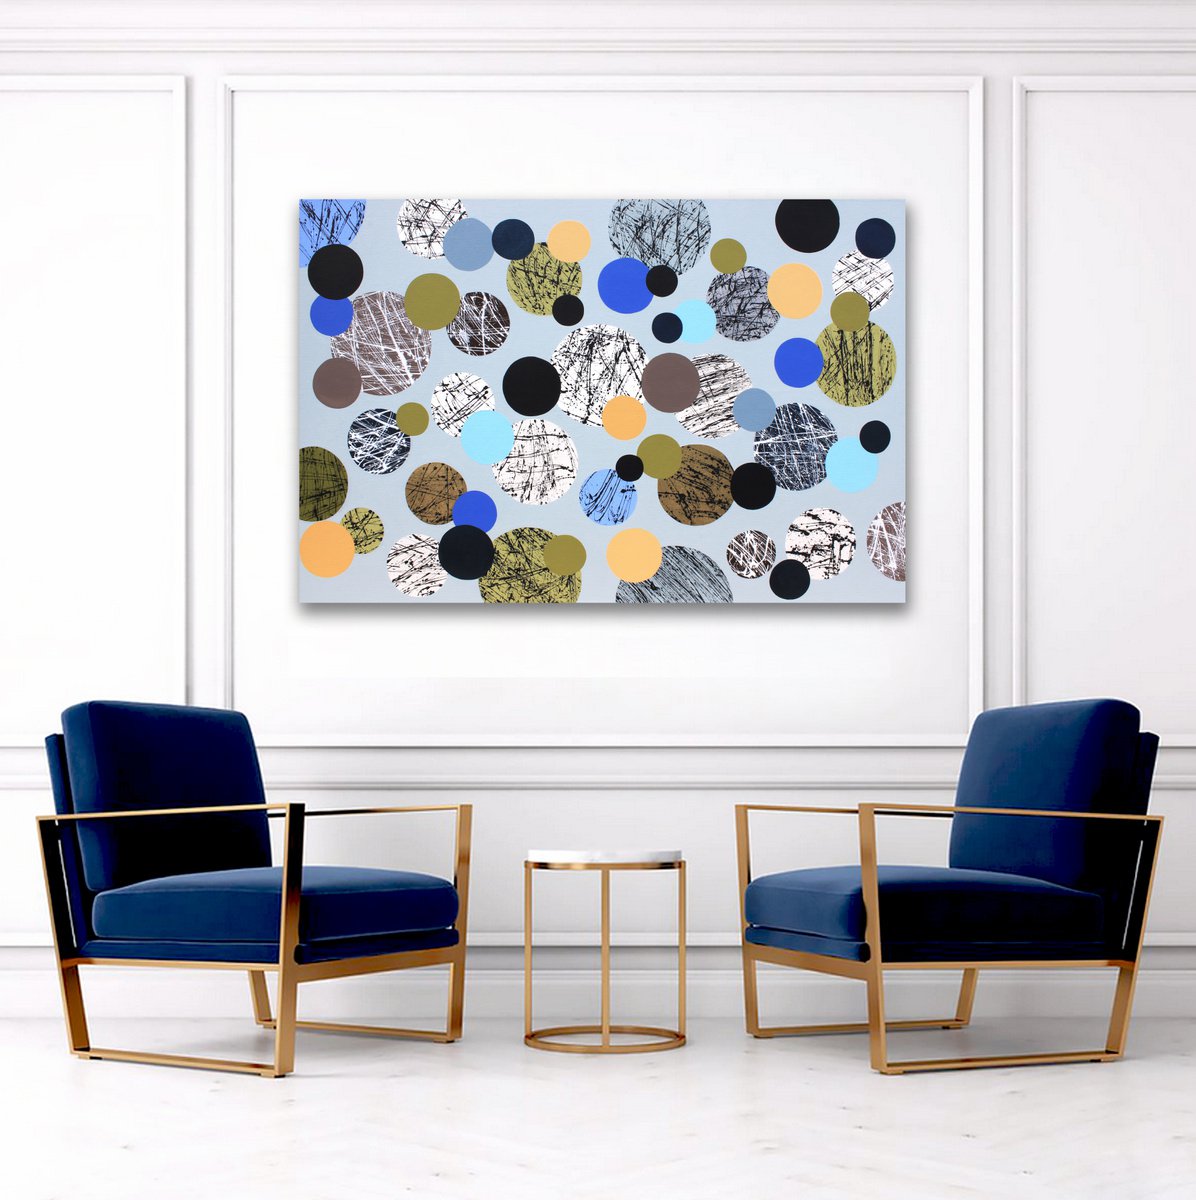 Only dots 8 Acrylic painting by Lucie Jirku | Artfinder